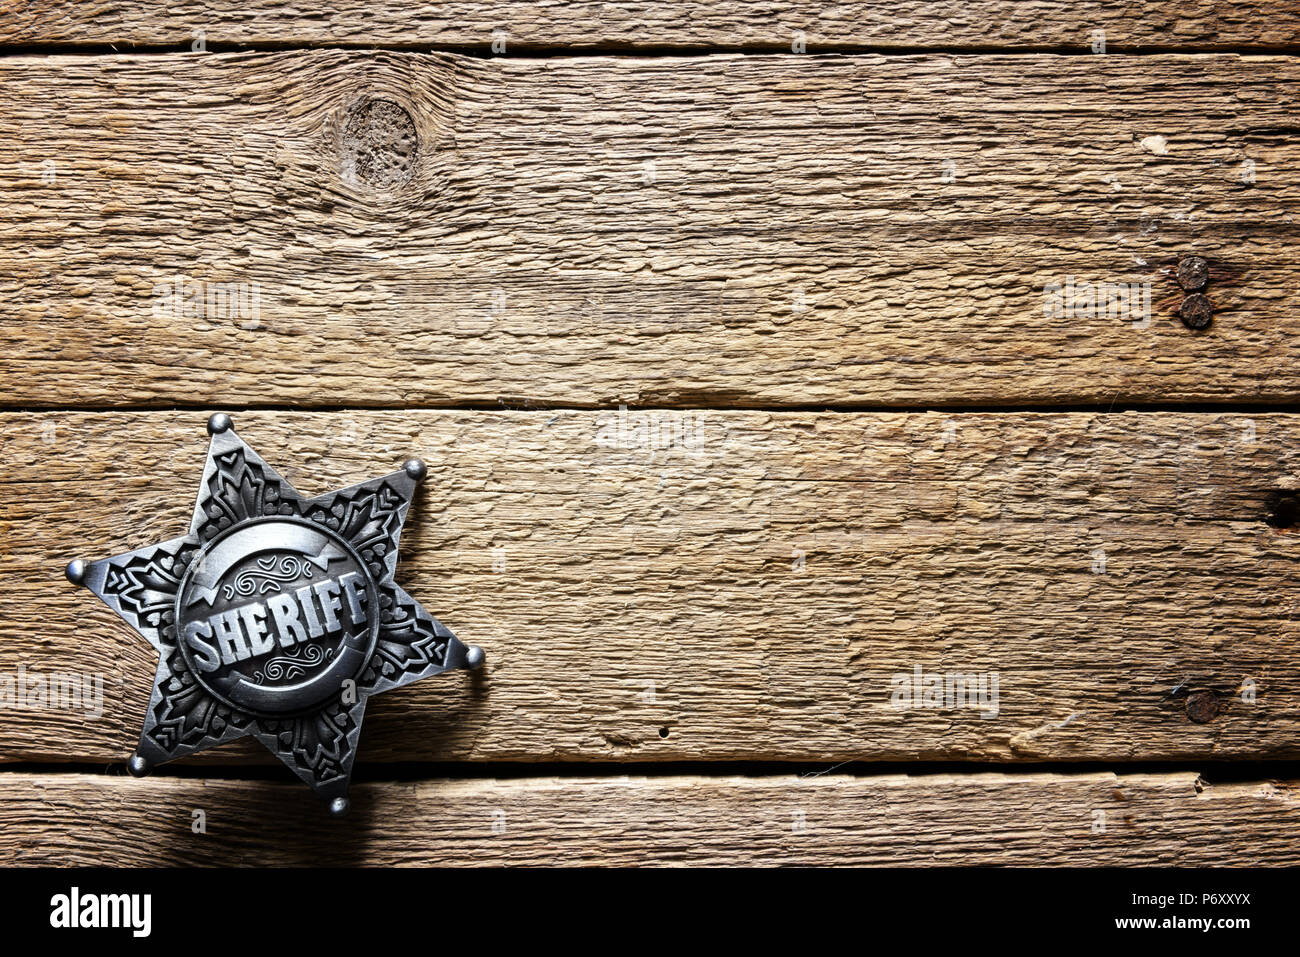 Sheriff star on wooden table Stock Photo